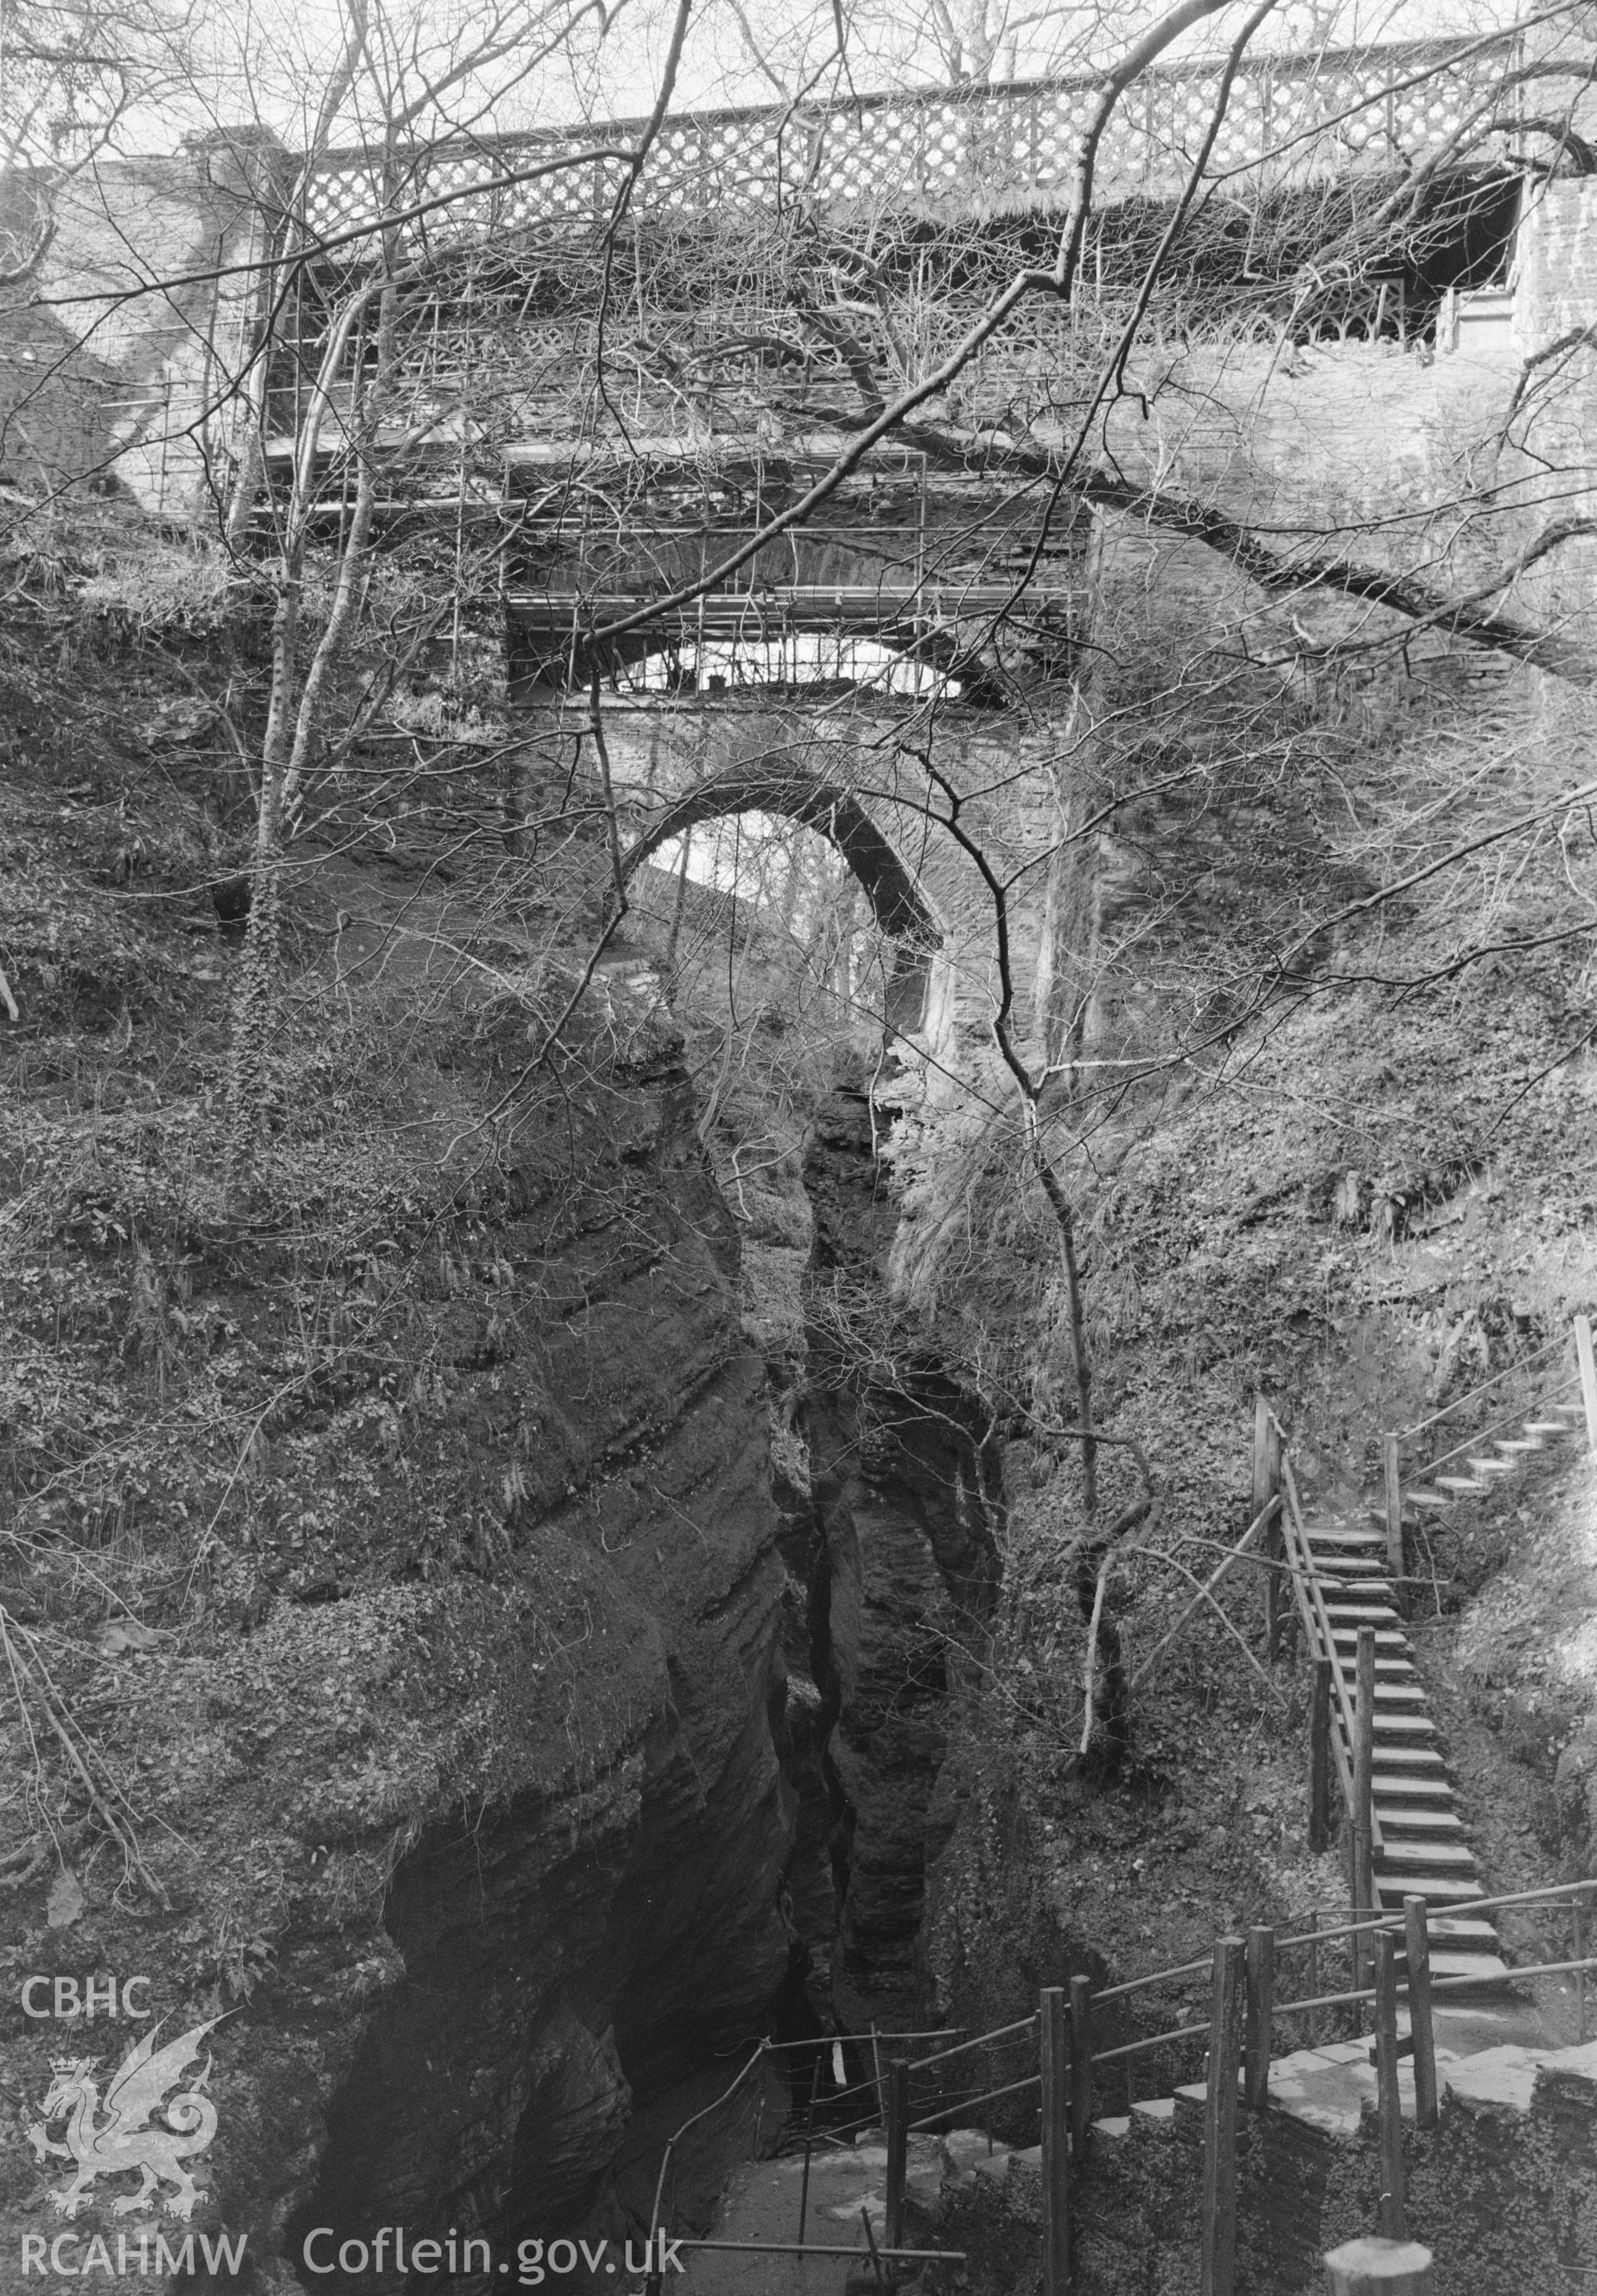 Digital copy of a black and white nitrate negative showing a view of Devils Bridge, taken by RCAHMW, undated.